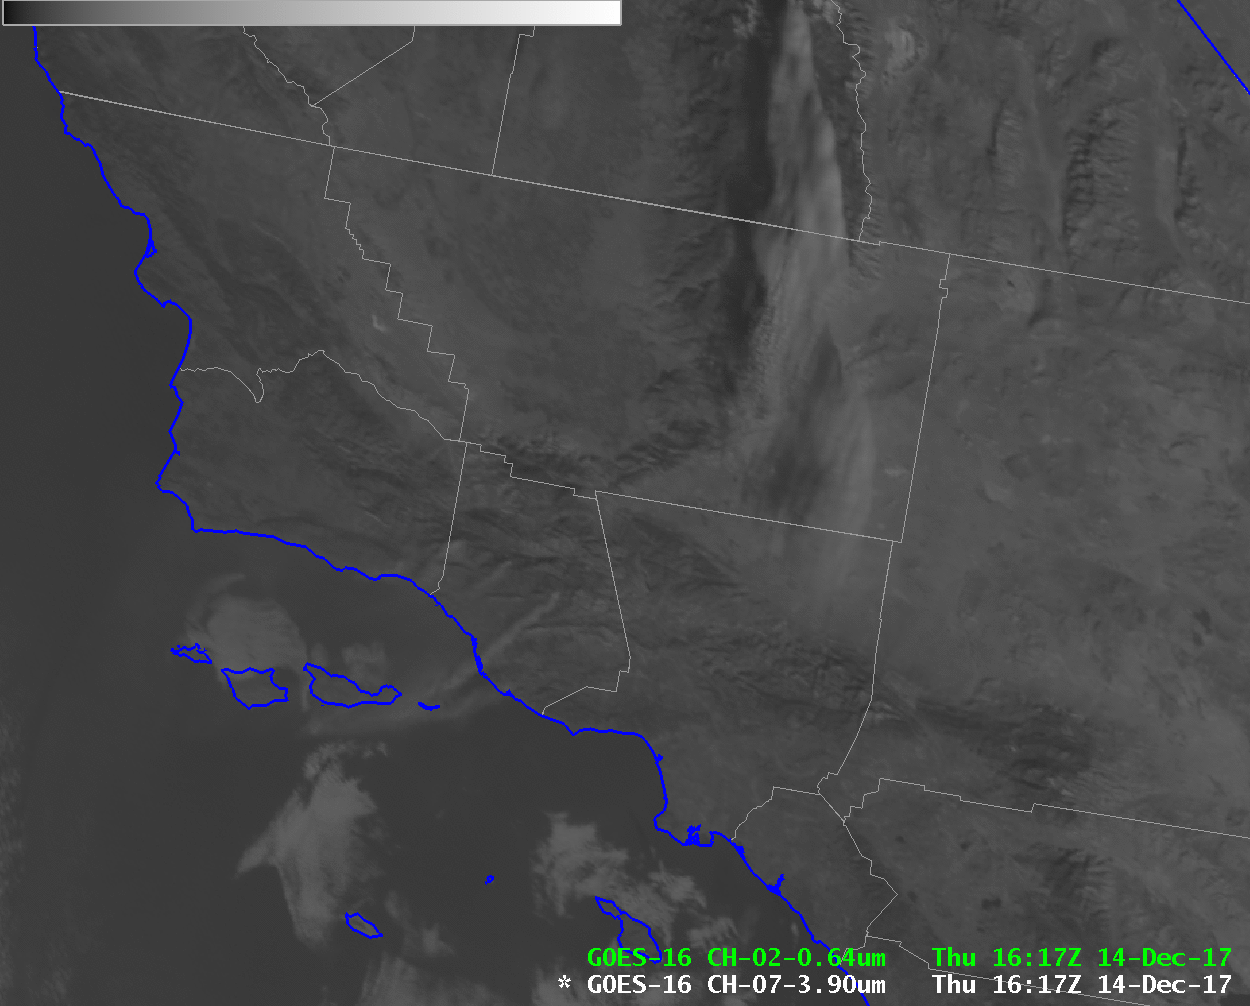 GOES-16 Shortwave Infrared (3.9 µm) image, showing thermal signatures of wildfires in Southern California [click to enlarge]